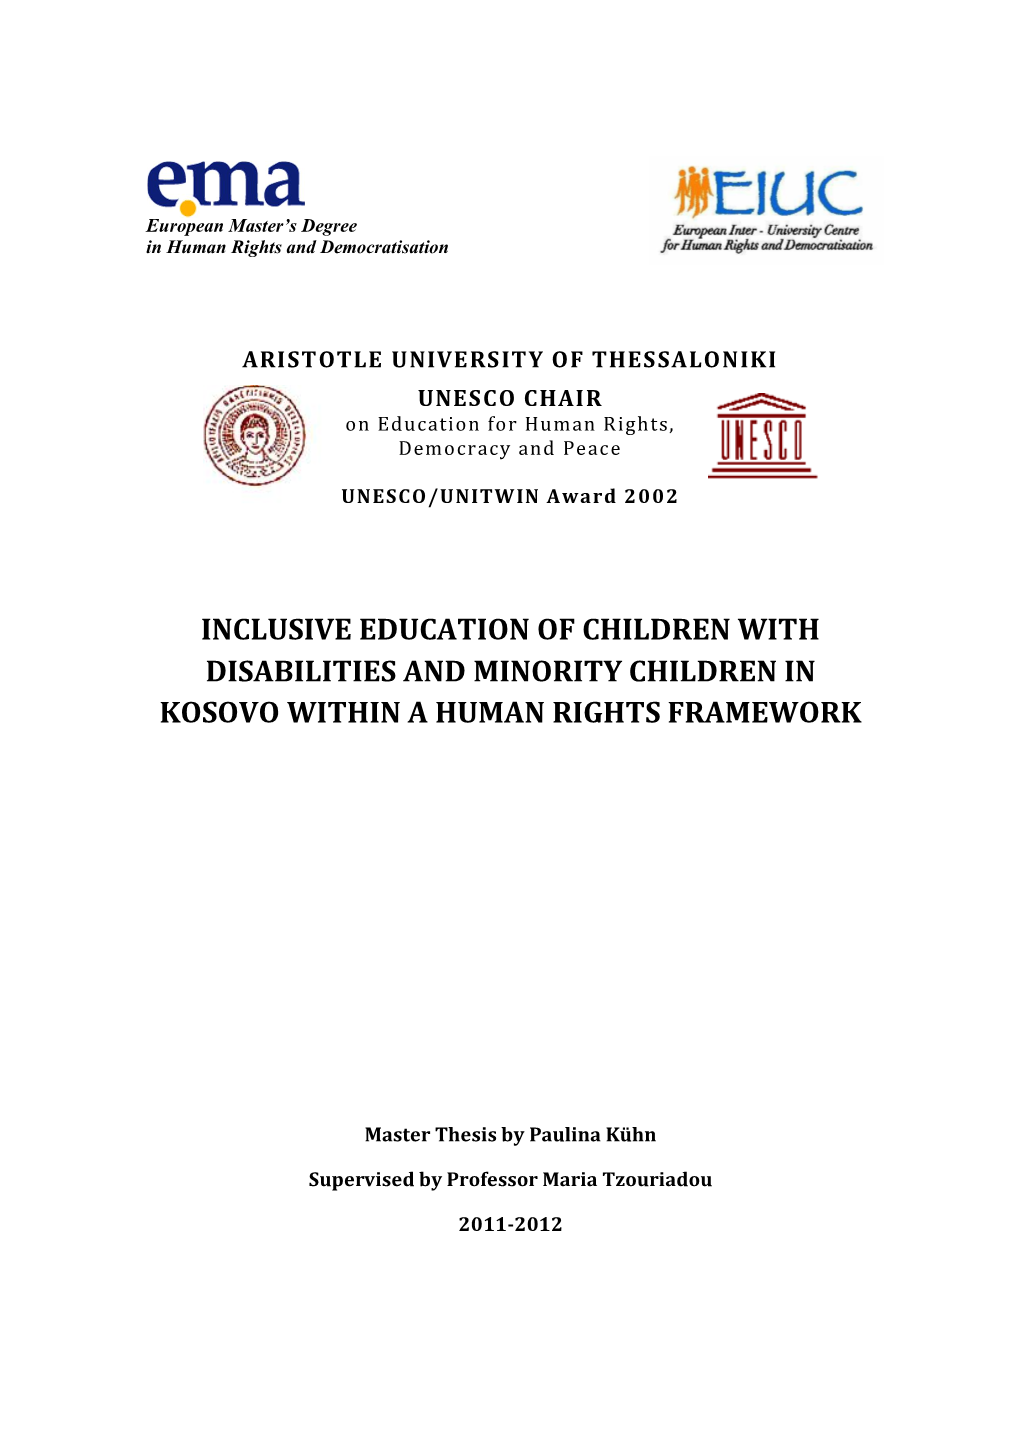 Inclusive Education of Children with Disabilities and Minority Children in Kosovo Within a Human Rights Framework